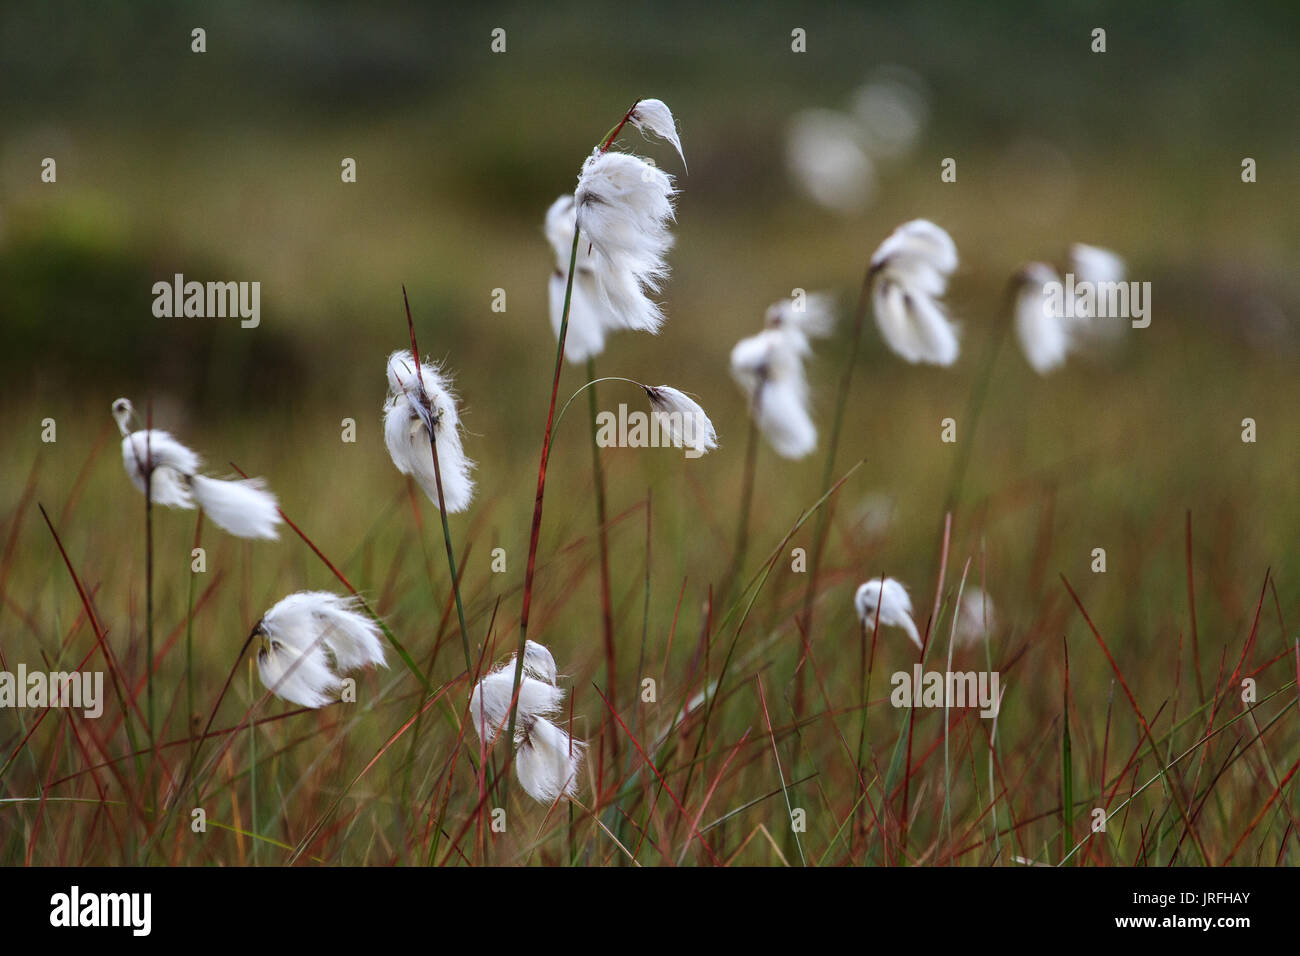 Cottongrass blowing in the wind in Lapland Stock Photo